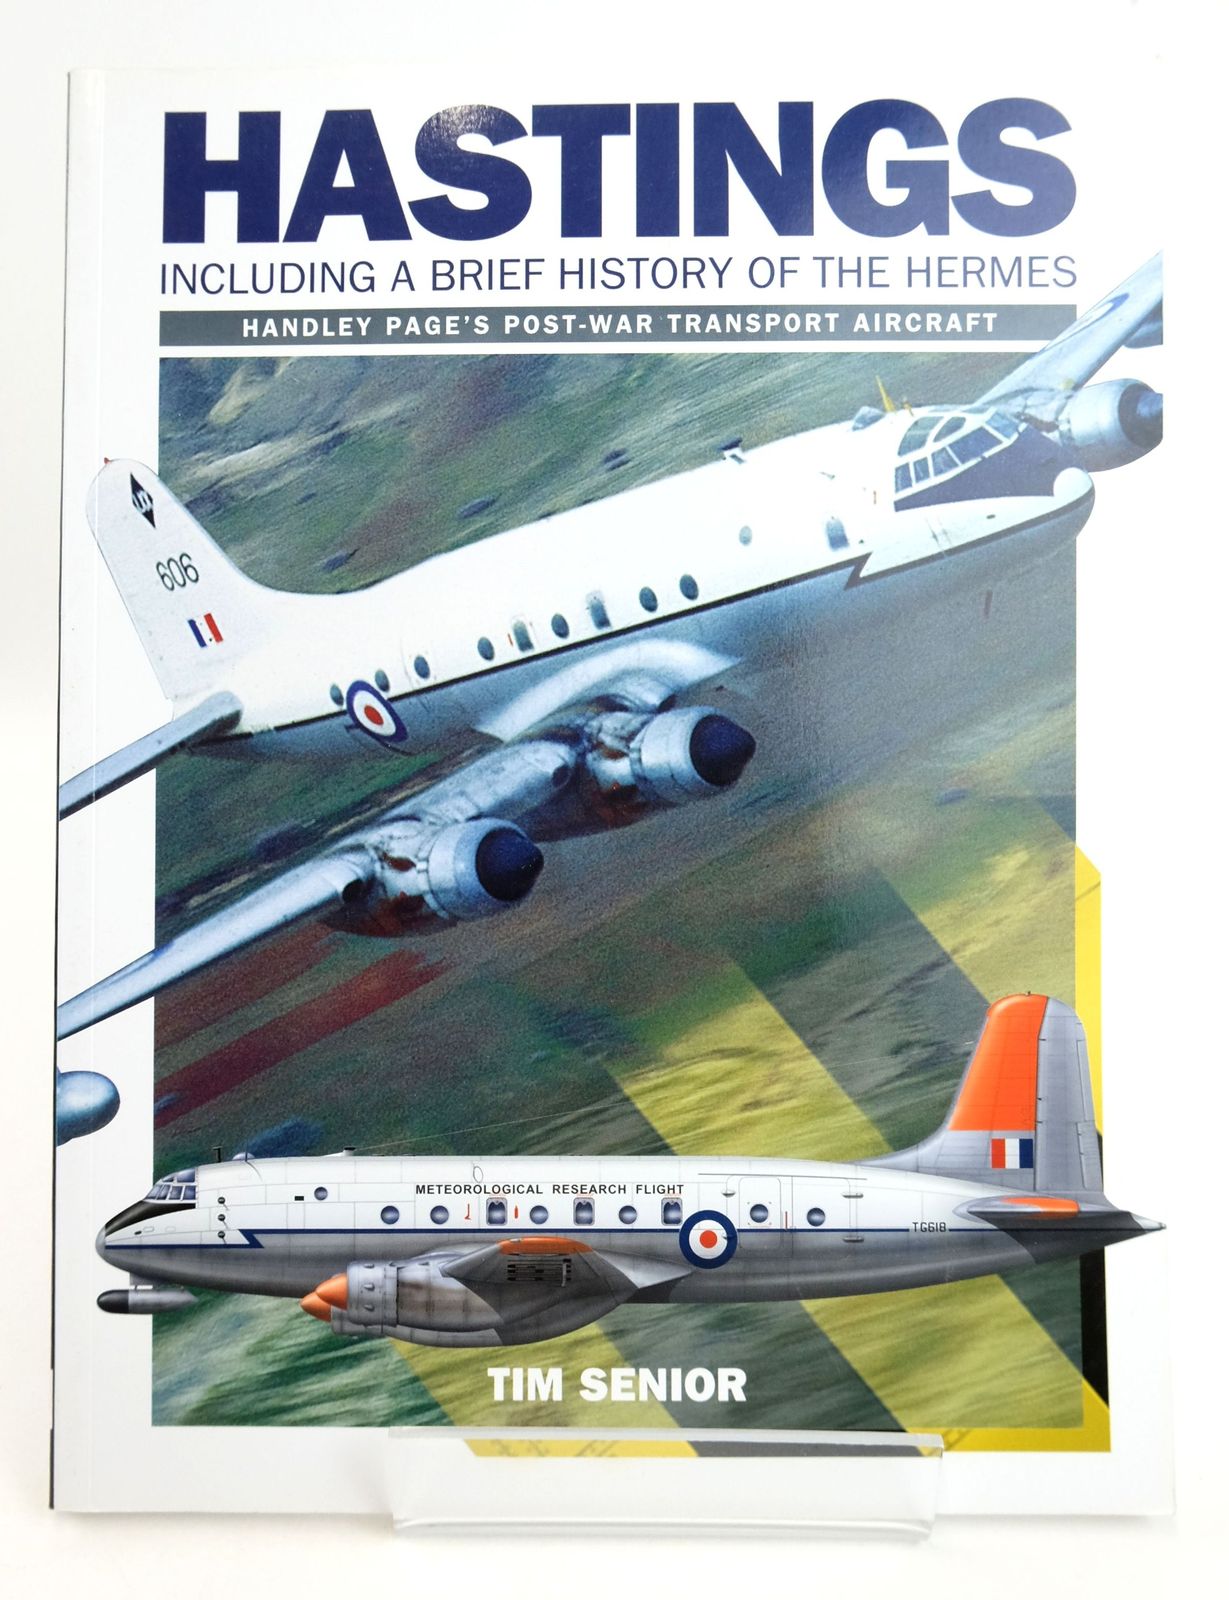 Handley Page: Hastings Including A Brief History Of The Hermes